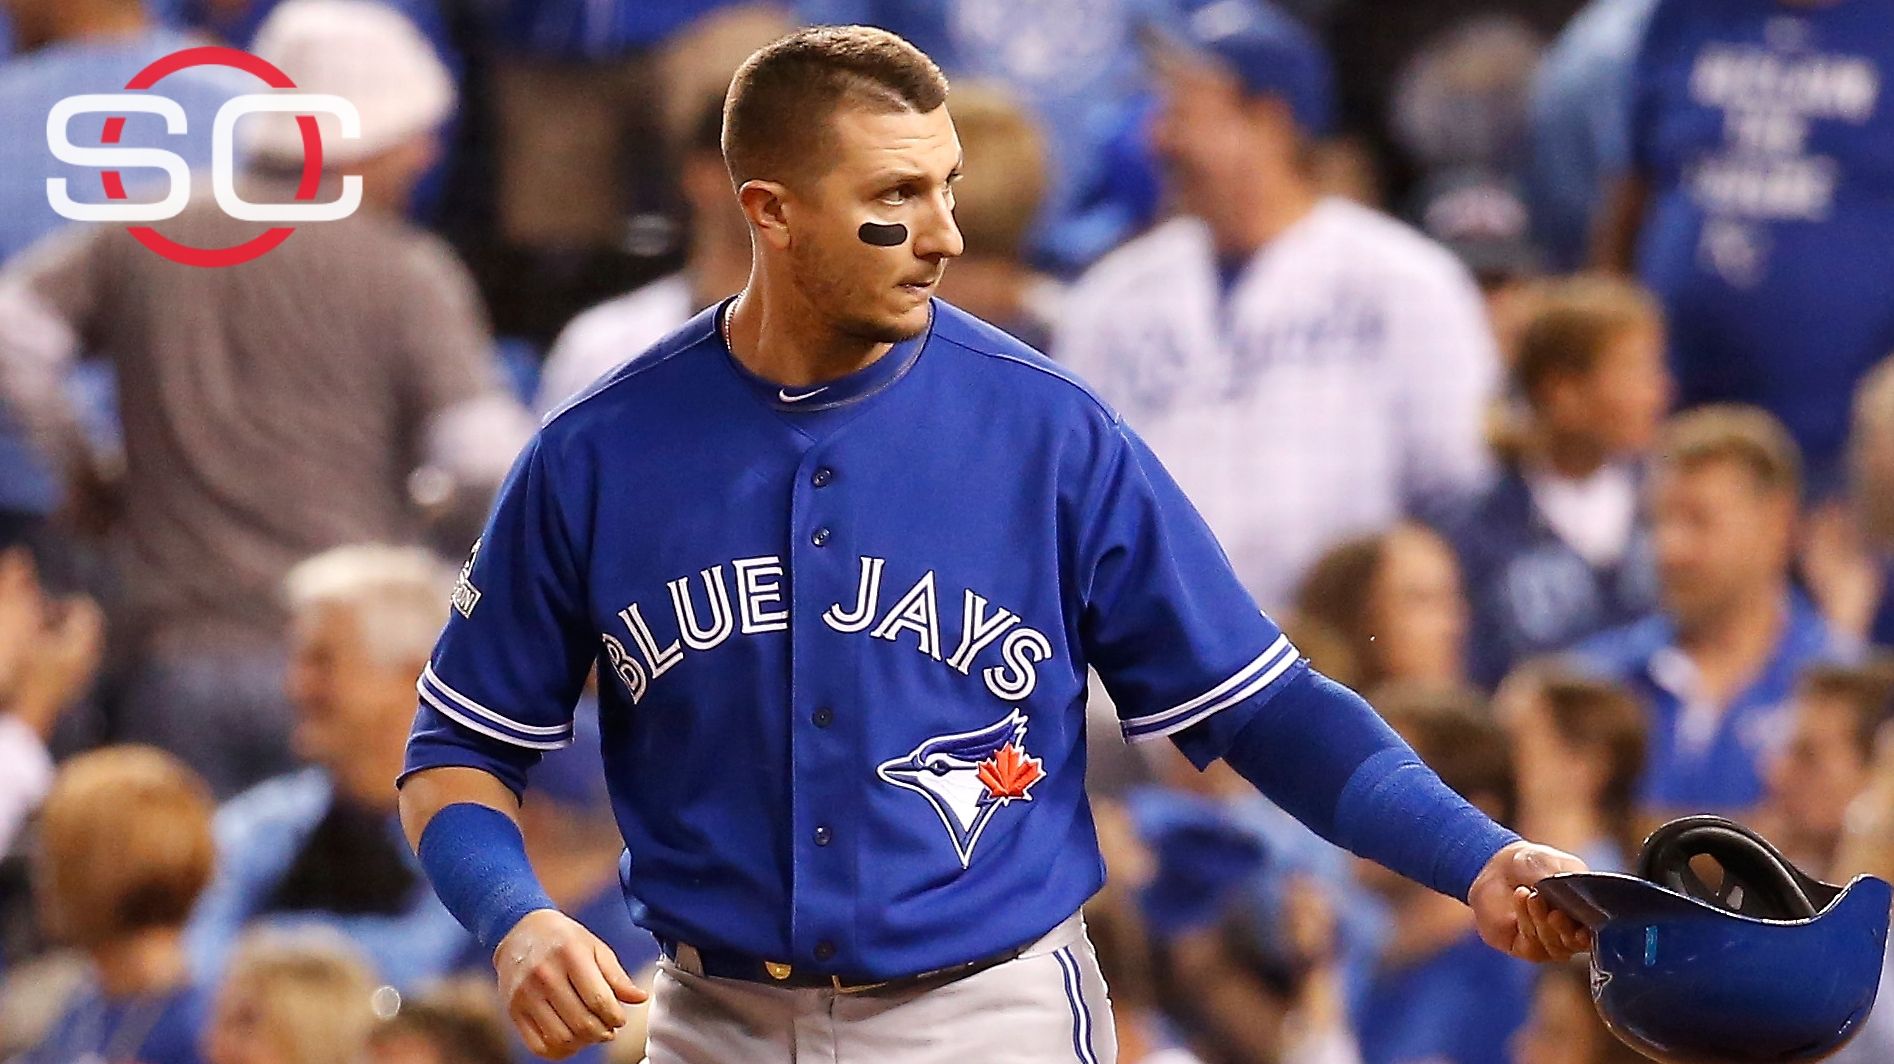 Weiss takes umbrage with Tulo's comments